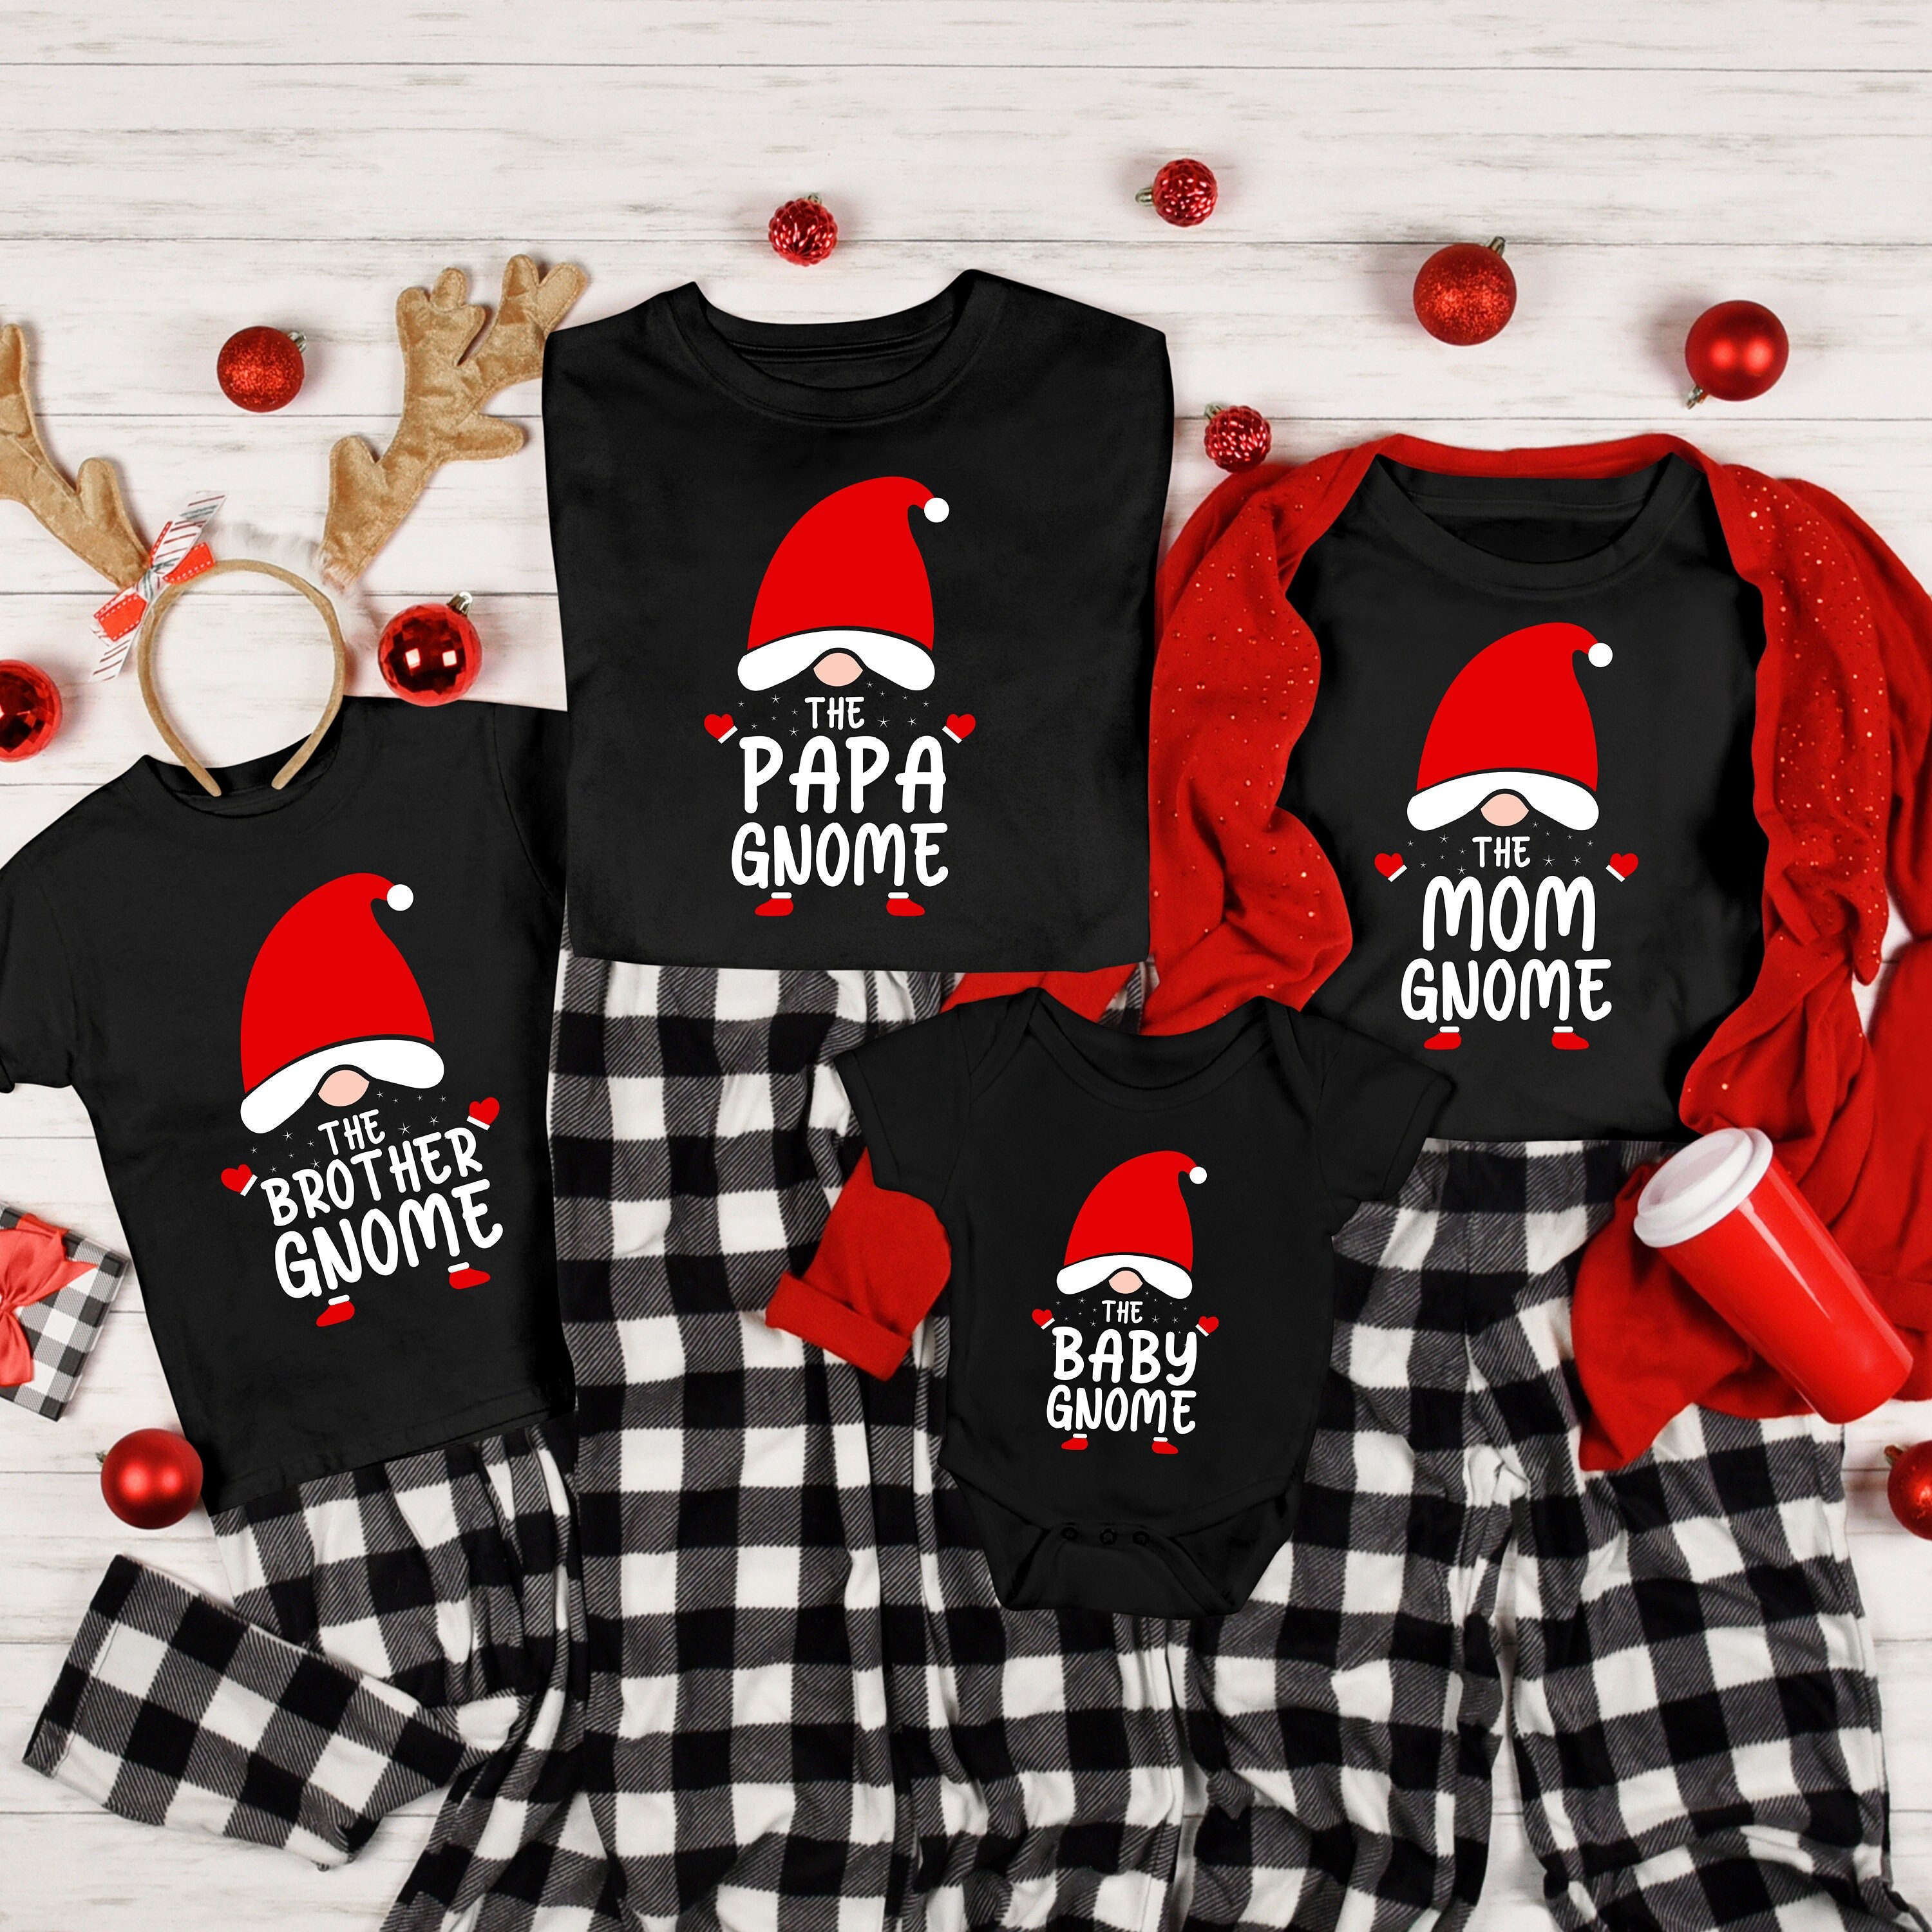 Christmas Family Matching Shirt, Most Likely To T-Shirt, Christmas Family Shirt, Custom Group Shirt, Christmas Shirt, Most Likely To